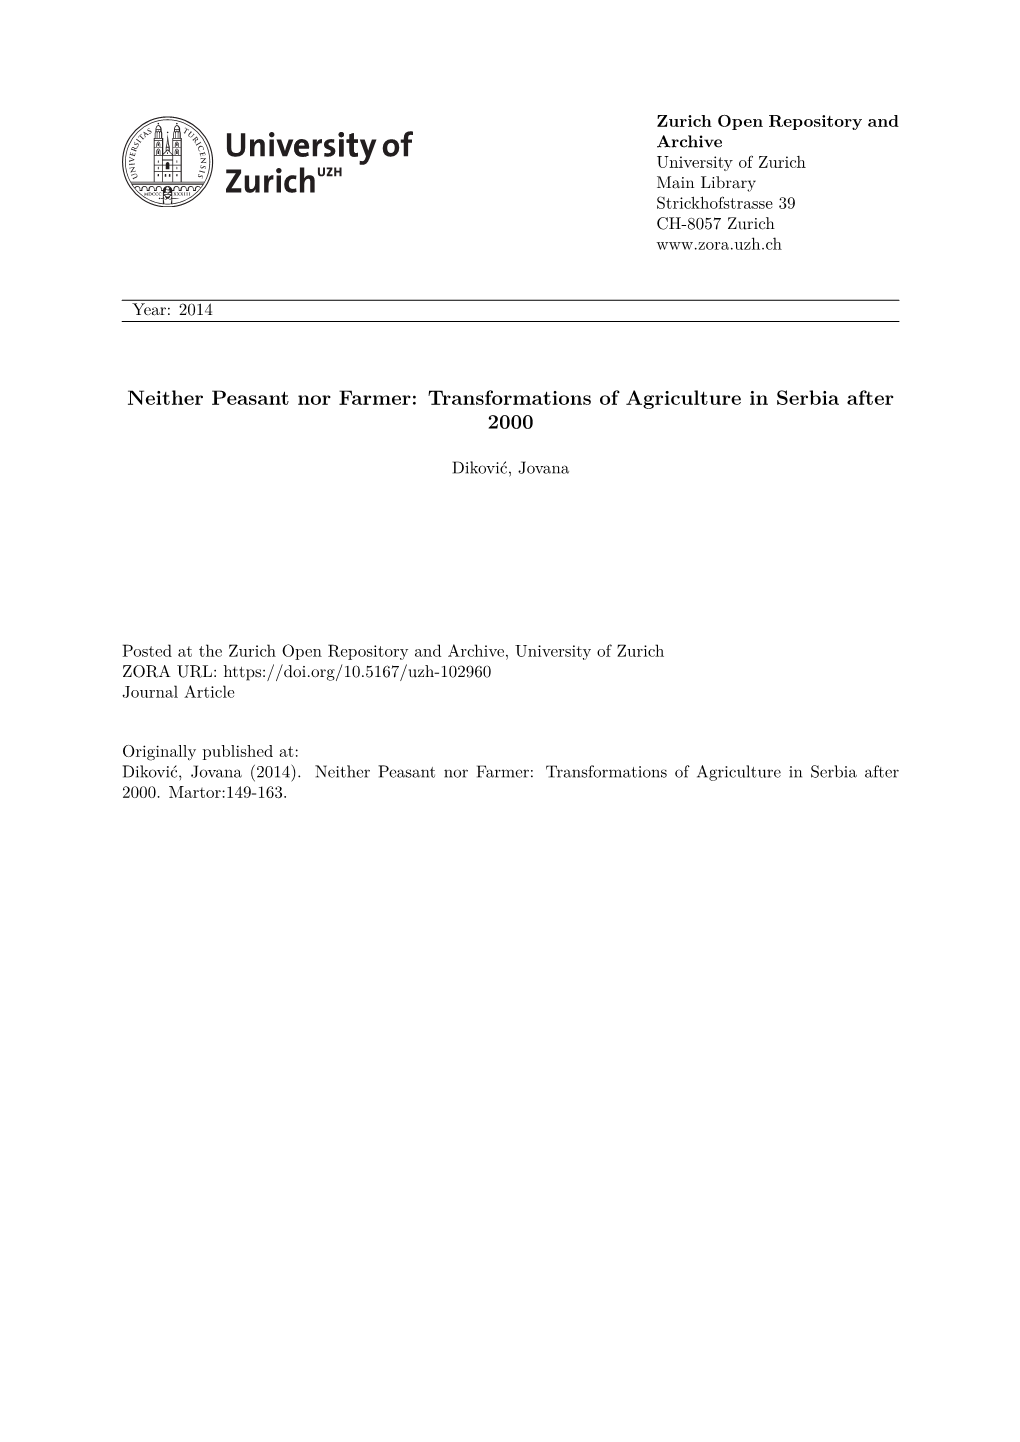 Neither Peasant, Nor Farmer Transformations of Agriculture in Serbia After 2000